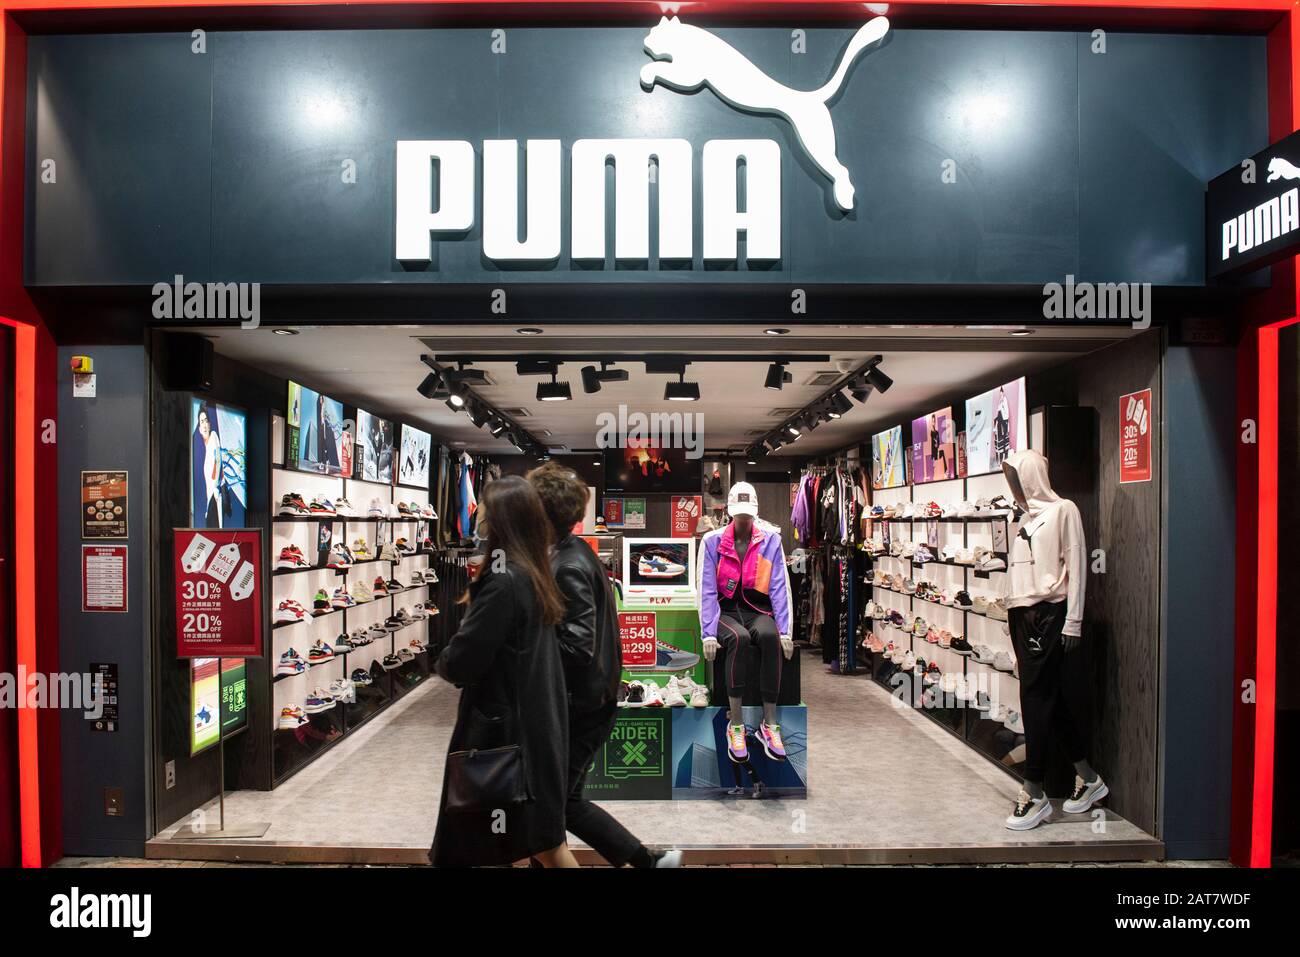 Page 3 - Puma Brand High Resolution Stock Photography and Images - Alamy